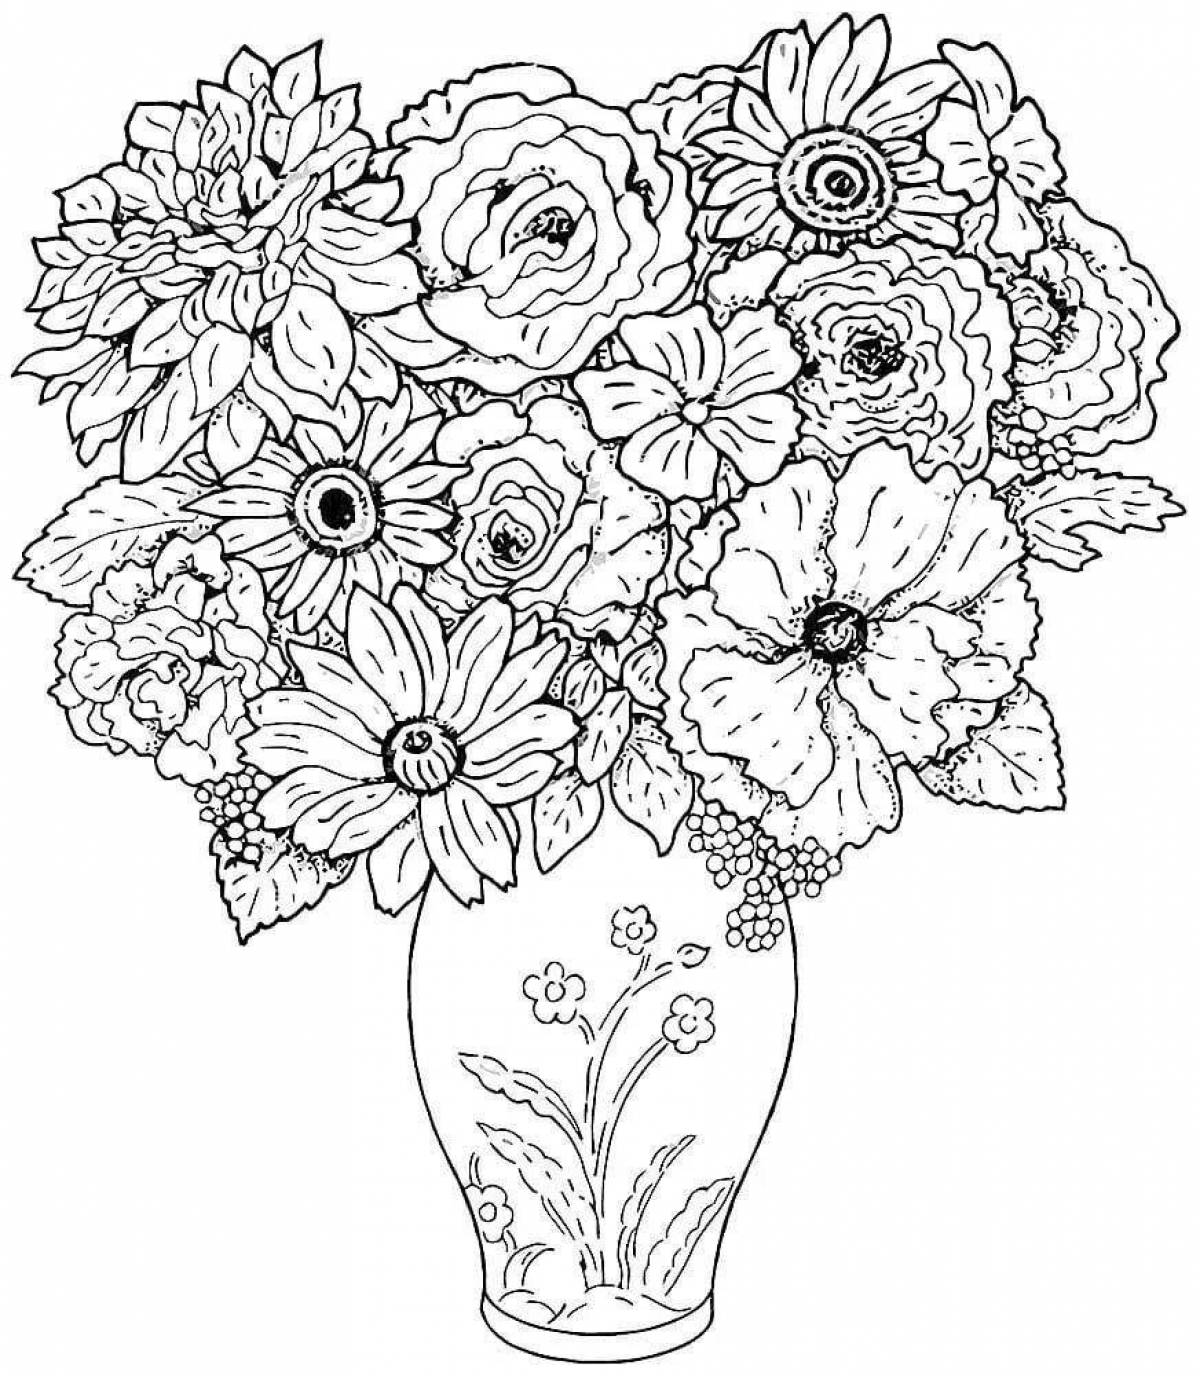 Fabulous flower coloring pages for kids